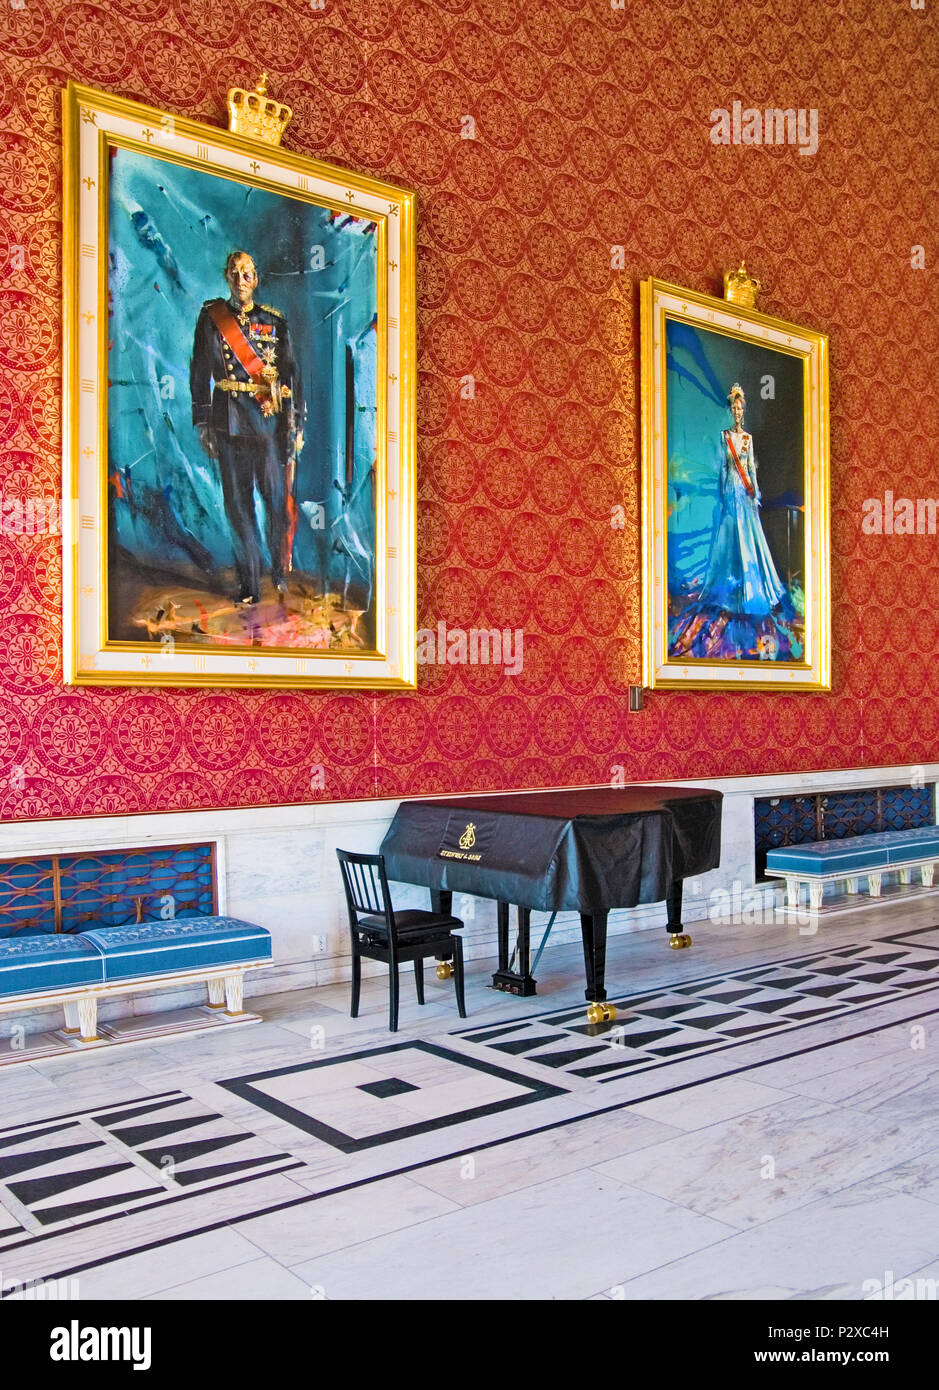 OSLO, NORWAY - APRIL 12, 2010: The banquet hall in City Hall of Oslo. The portraits of King of Norway Harald V and Queen of Norway Sonja Stock Photo